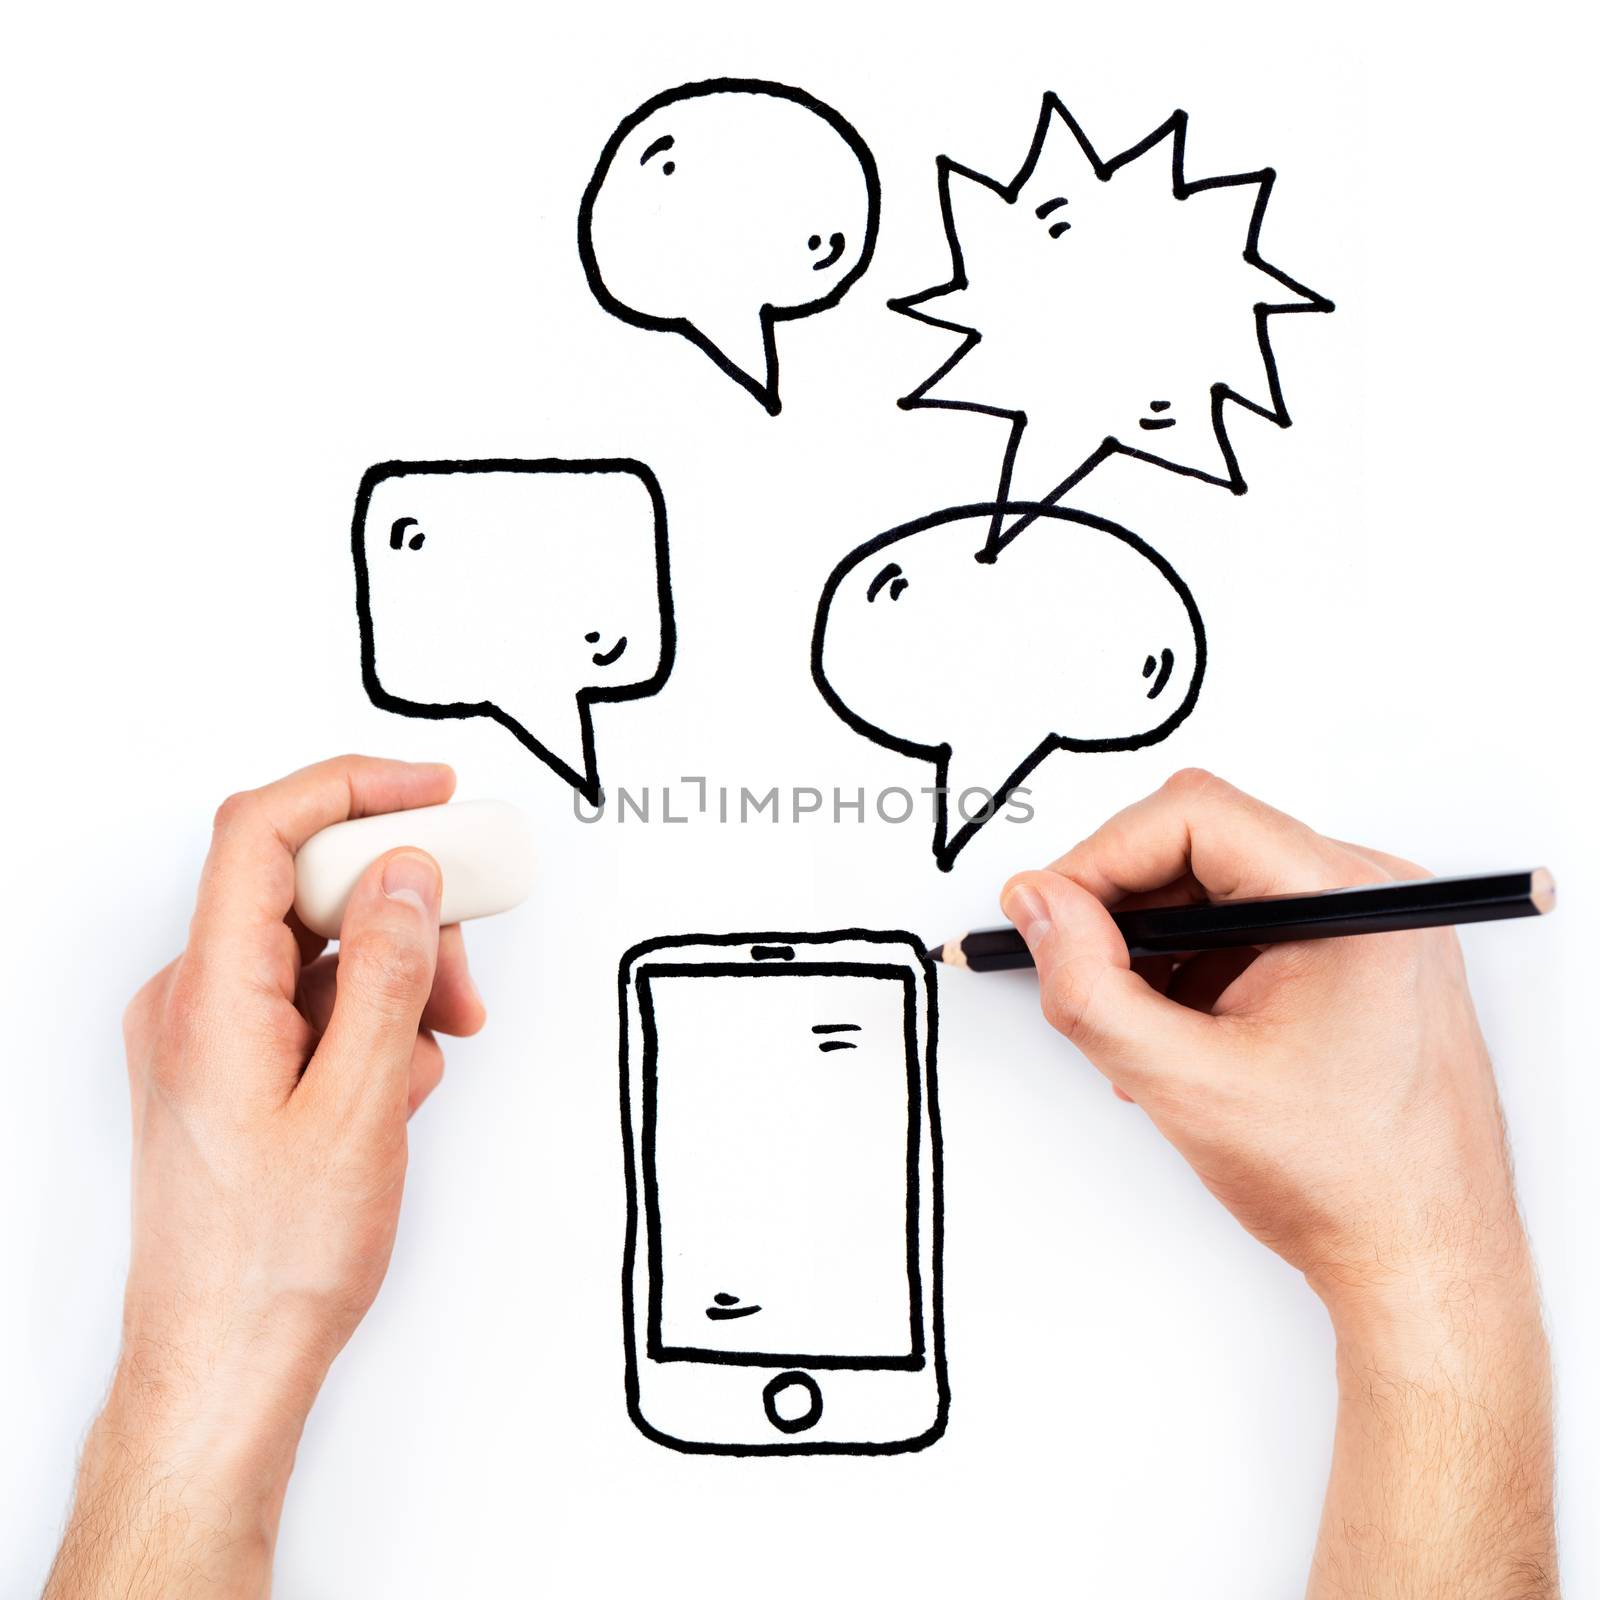 Man's hand draws phone and messages on white background